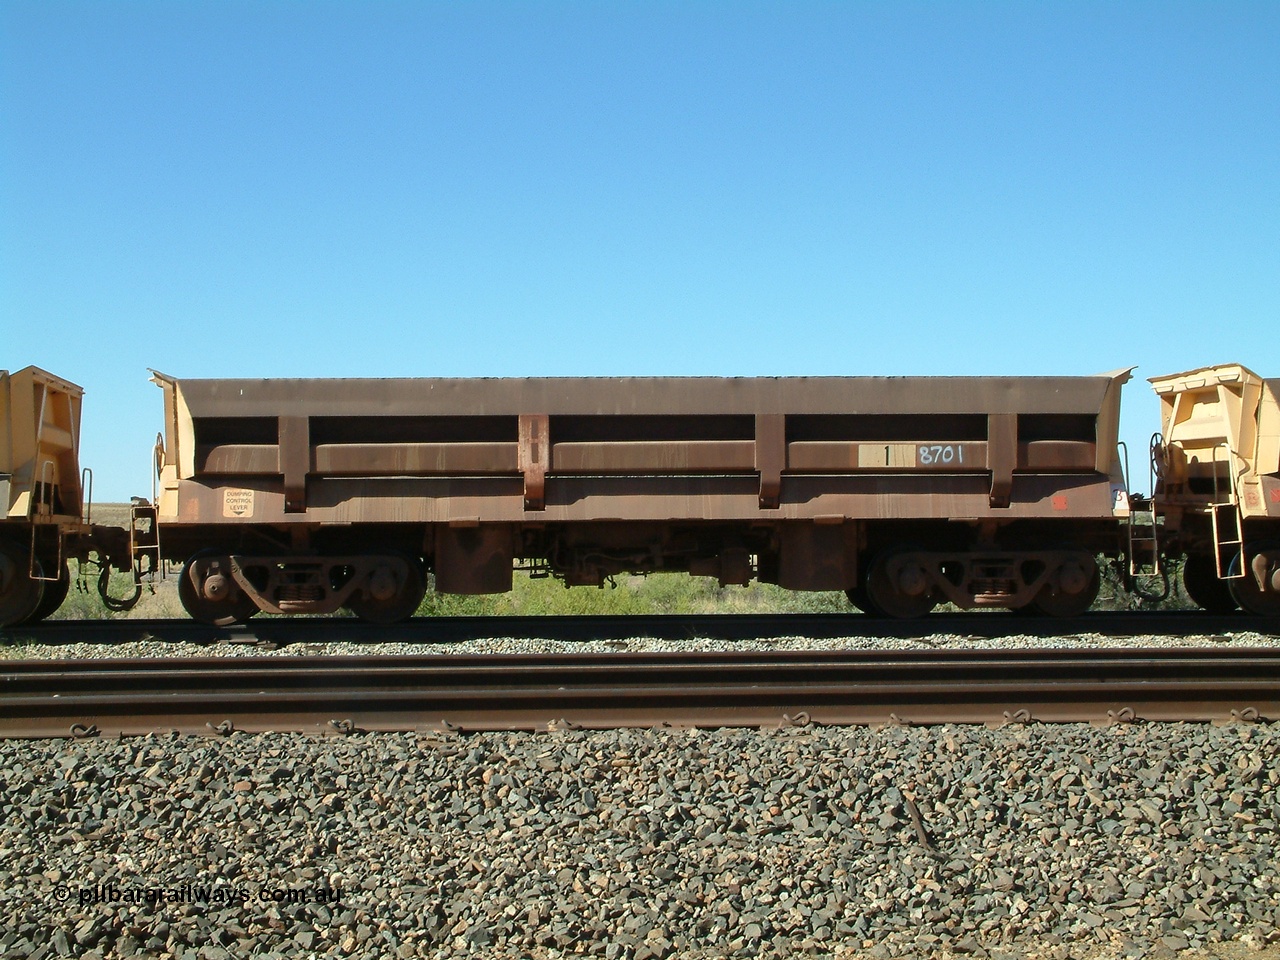 040810 144947
Shaw Siding backtrack, Difco Ohio USA 1967 build short side dump waggon 8701, originally built for Goldsworthy Mining as no. 1, renumbered by Mt Newman as 8701, one five waggons built for Goldsworthy Mining.
Keywords: Difco-Ohio-USA;GML;BHP-ballast-waggon;